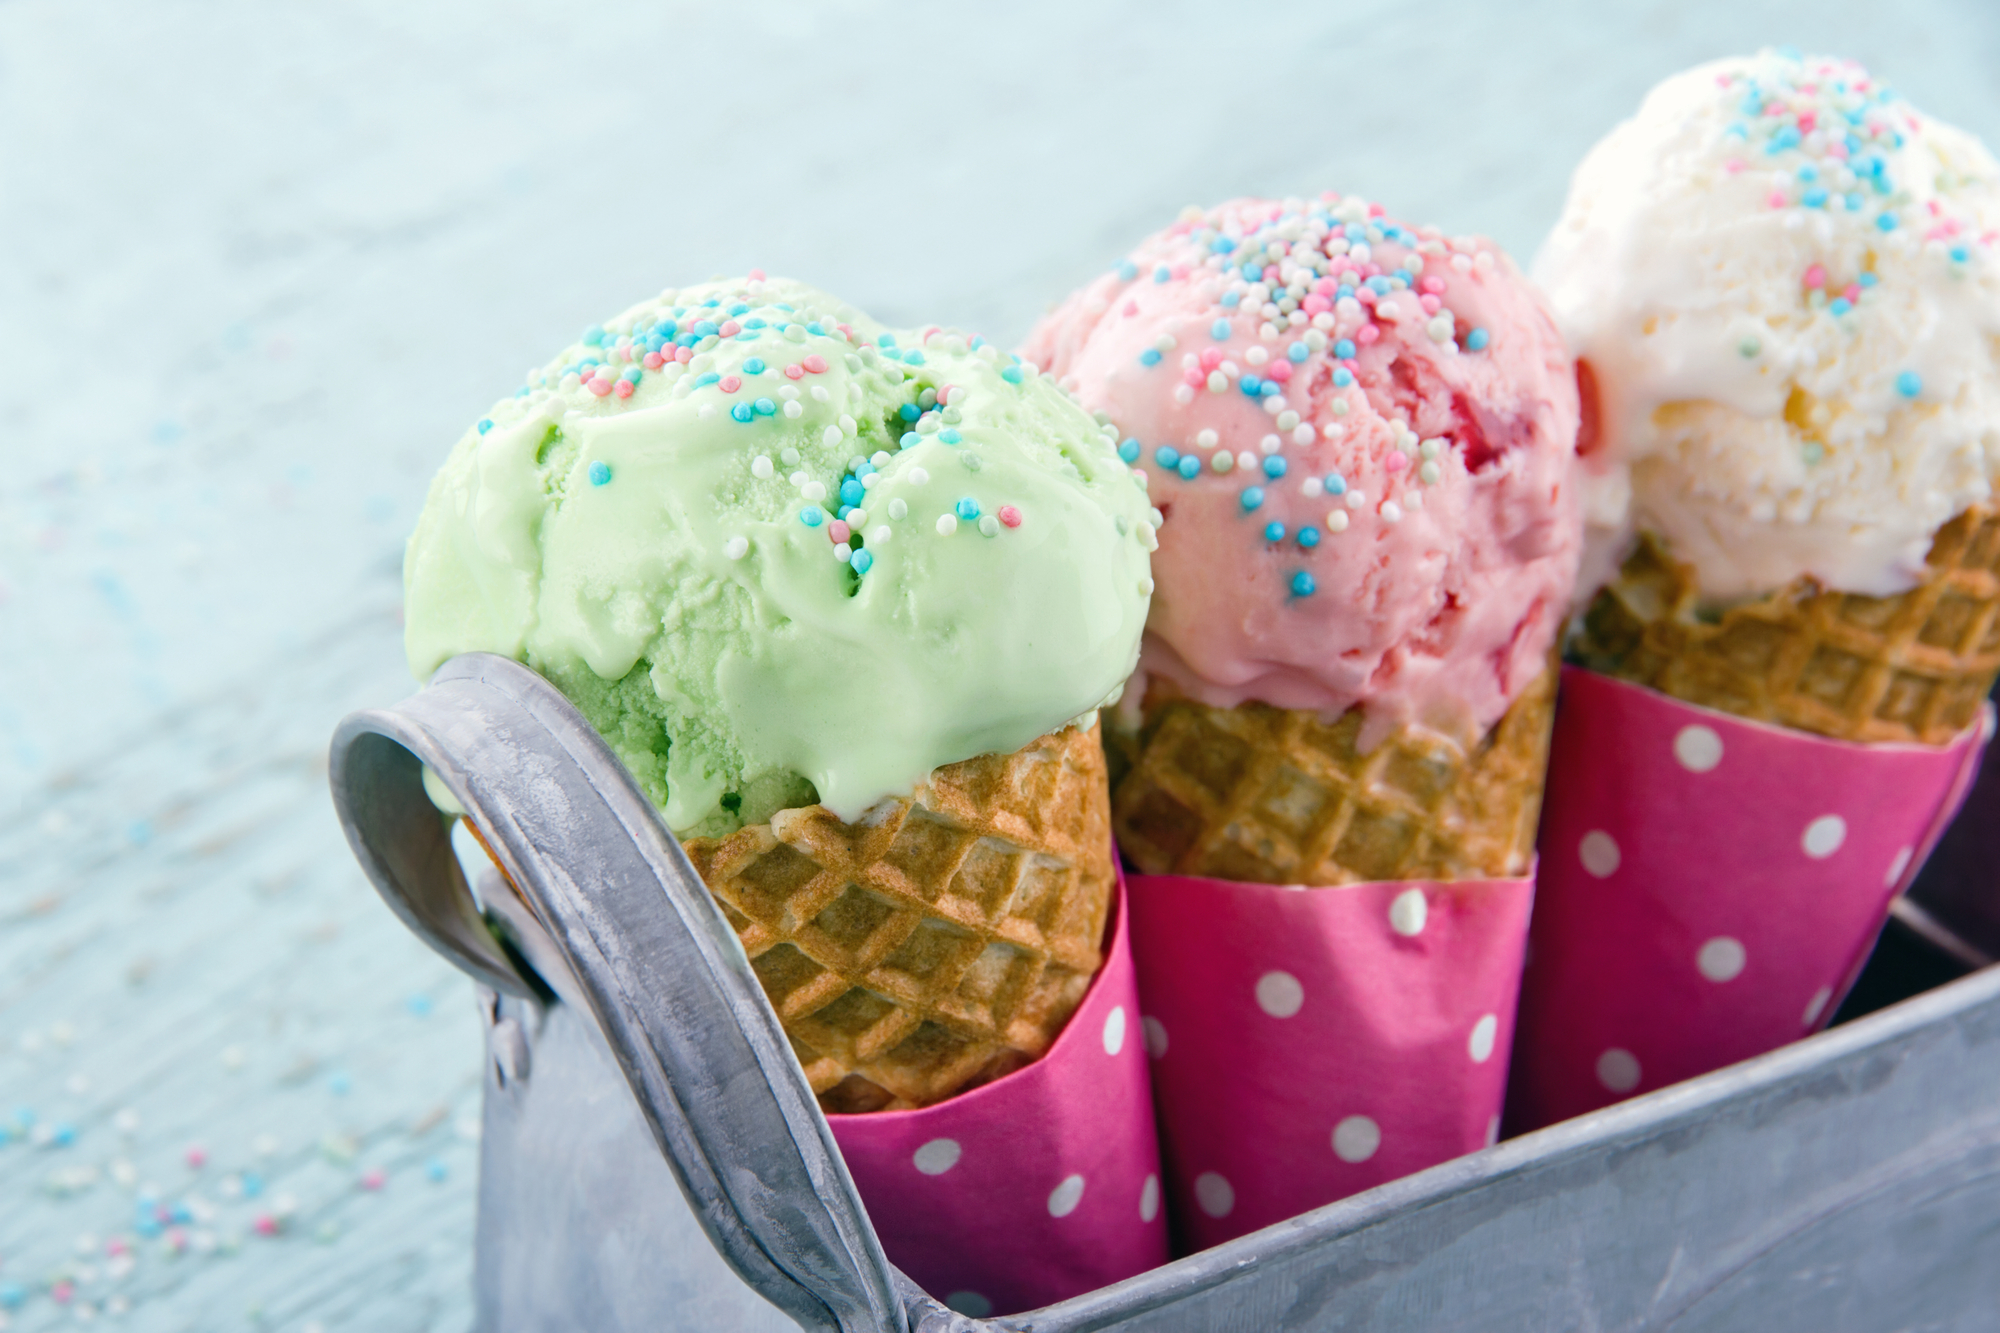 Maximize Your Ice Cream Experience: Avoid Brain Freeze with These Simple Tips